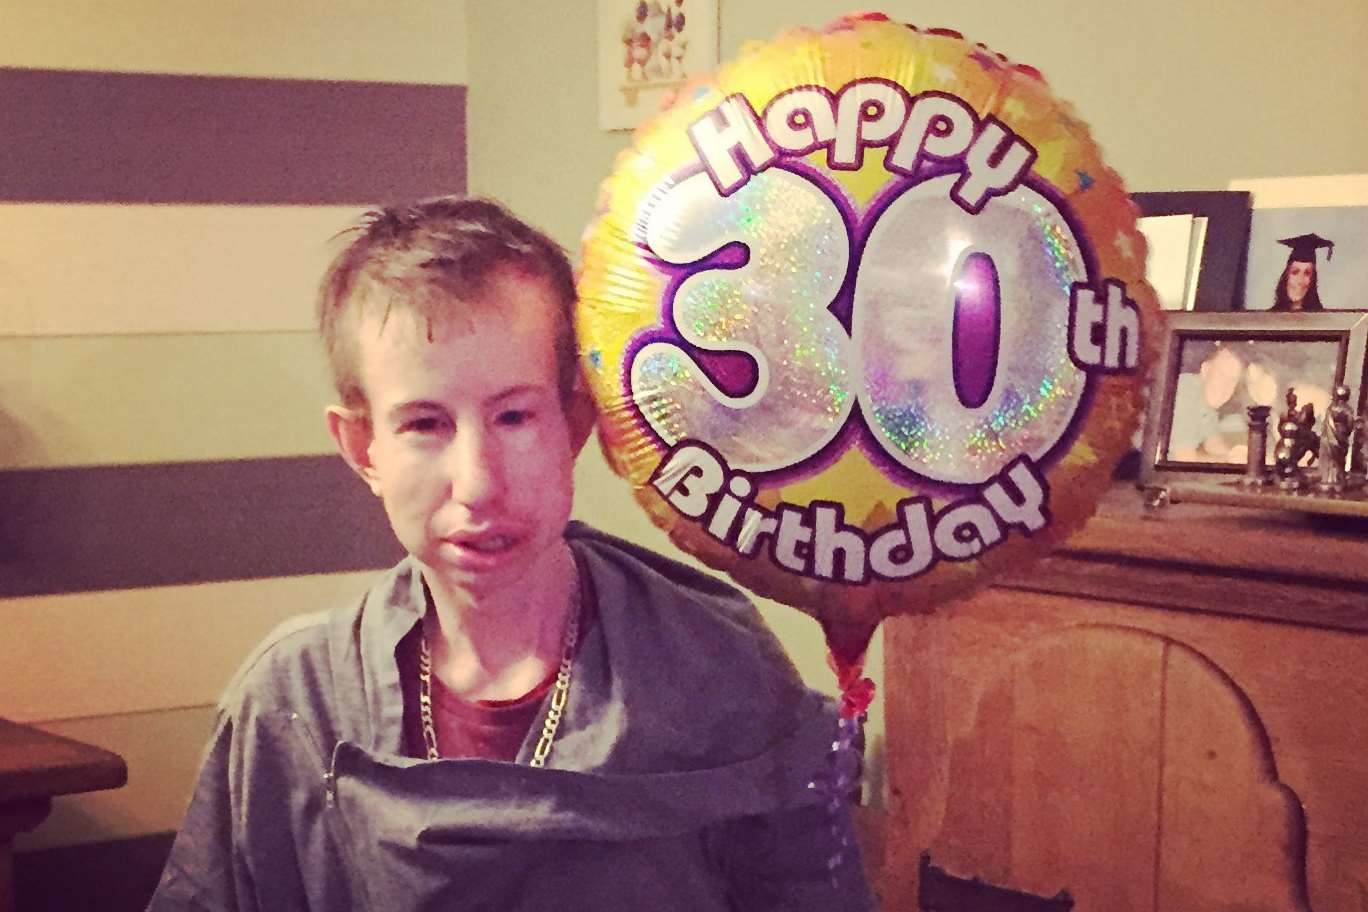 He celebrated his 30th birthday with his family on Tuesday